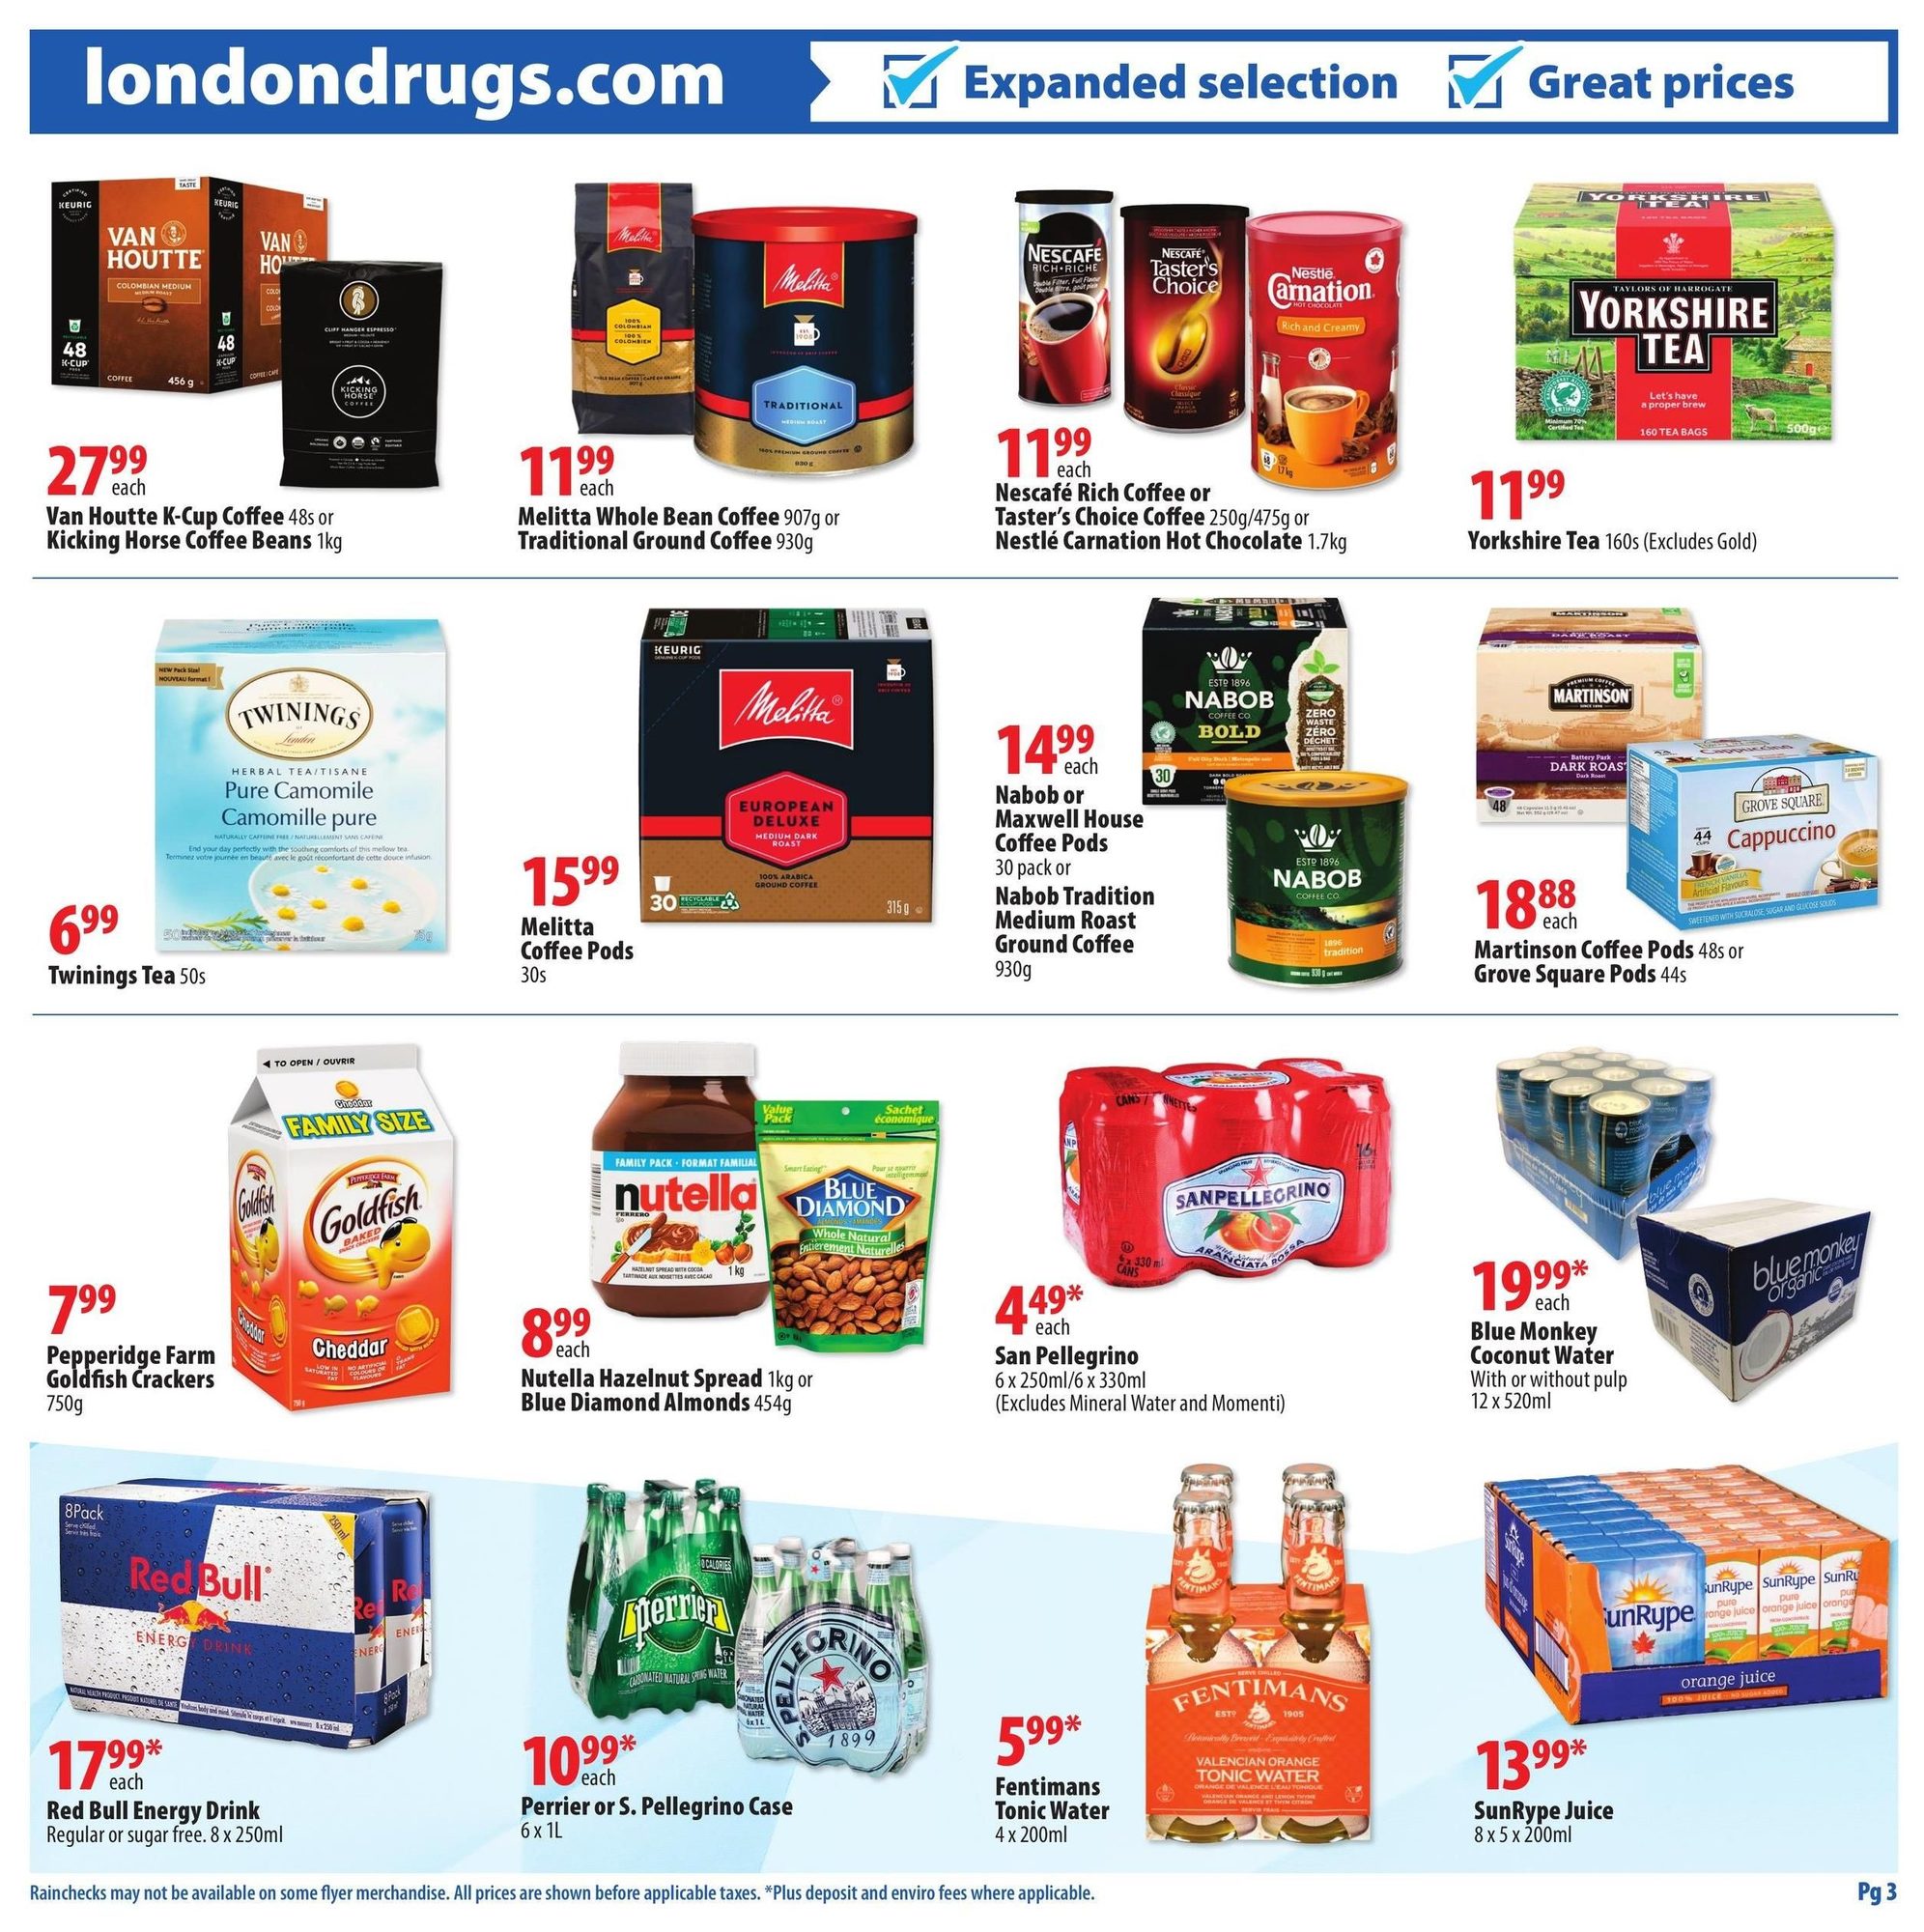 London Drugs - Case Lot Savings Event - Page 3